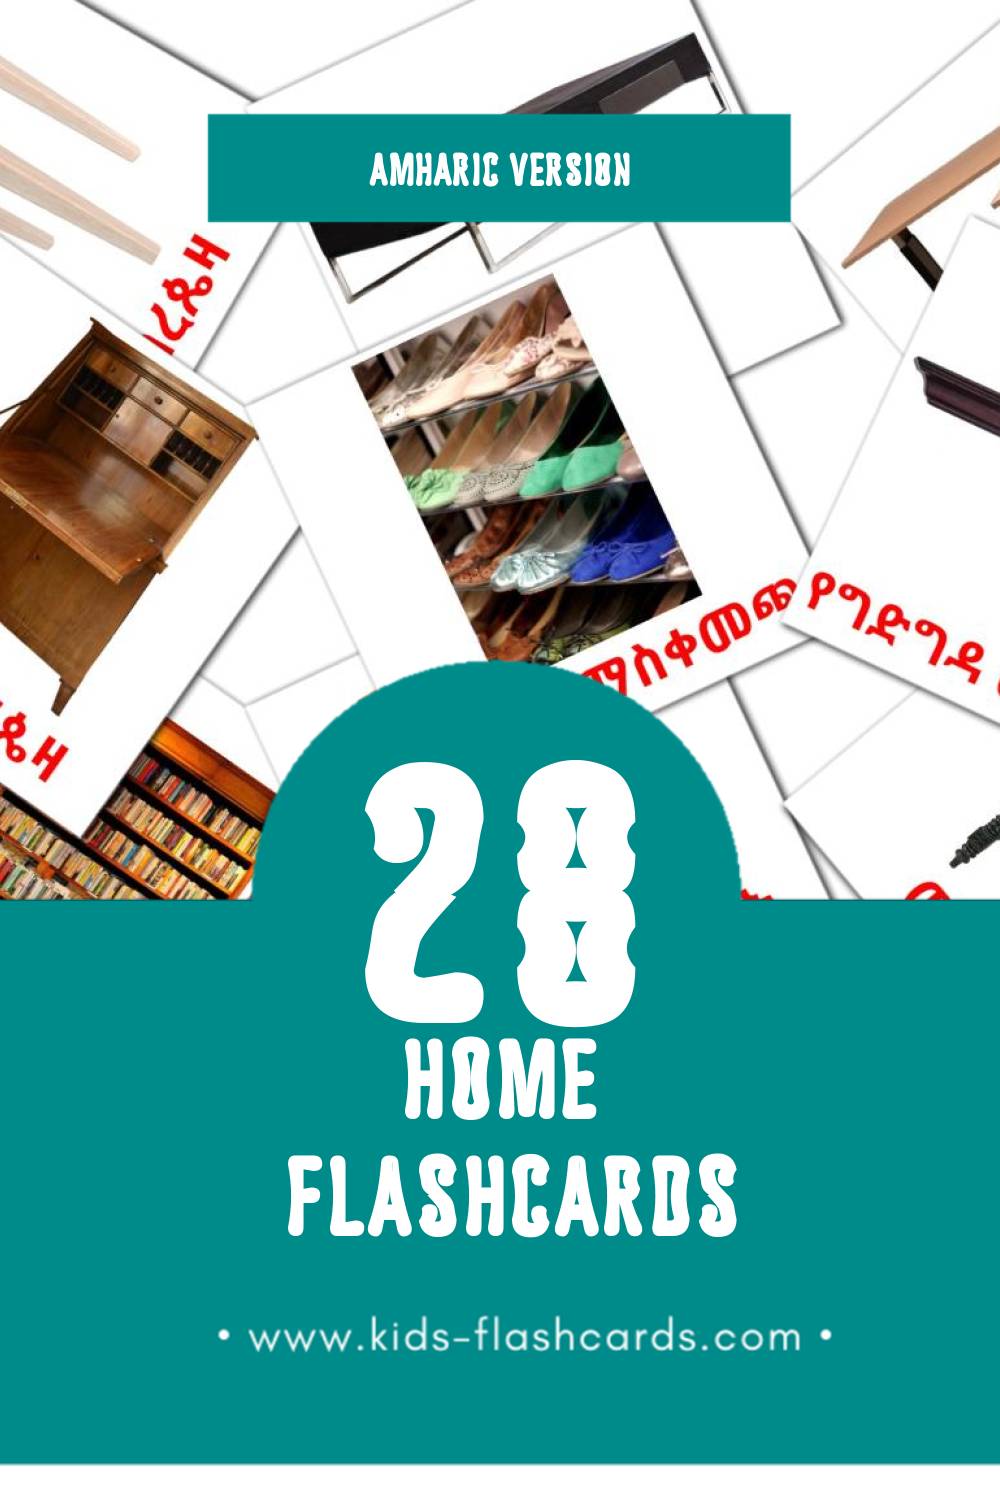 Visual ቤት Flashcards for Toddlers (31 cards in Amharic)